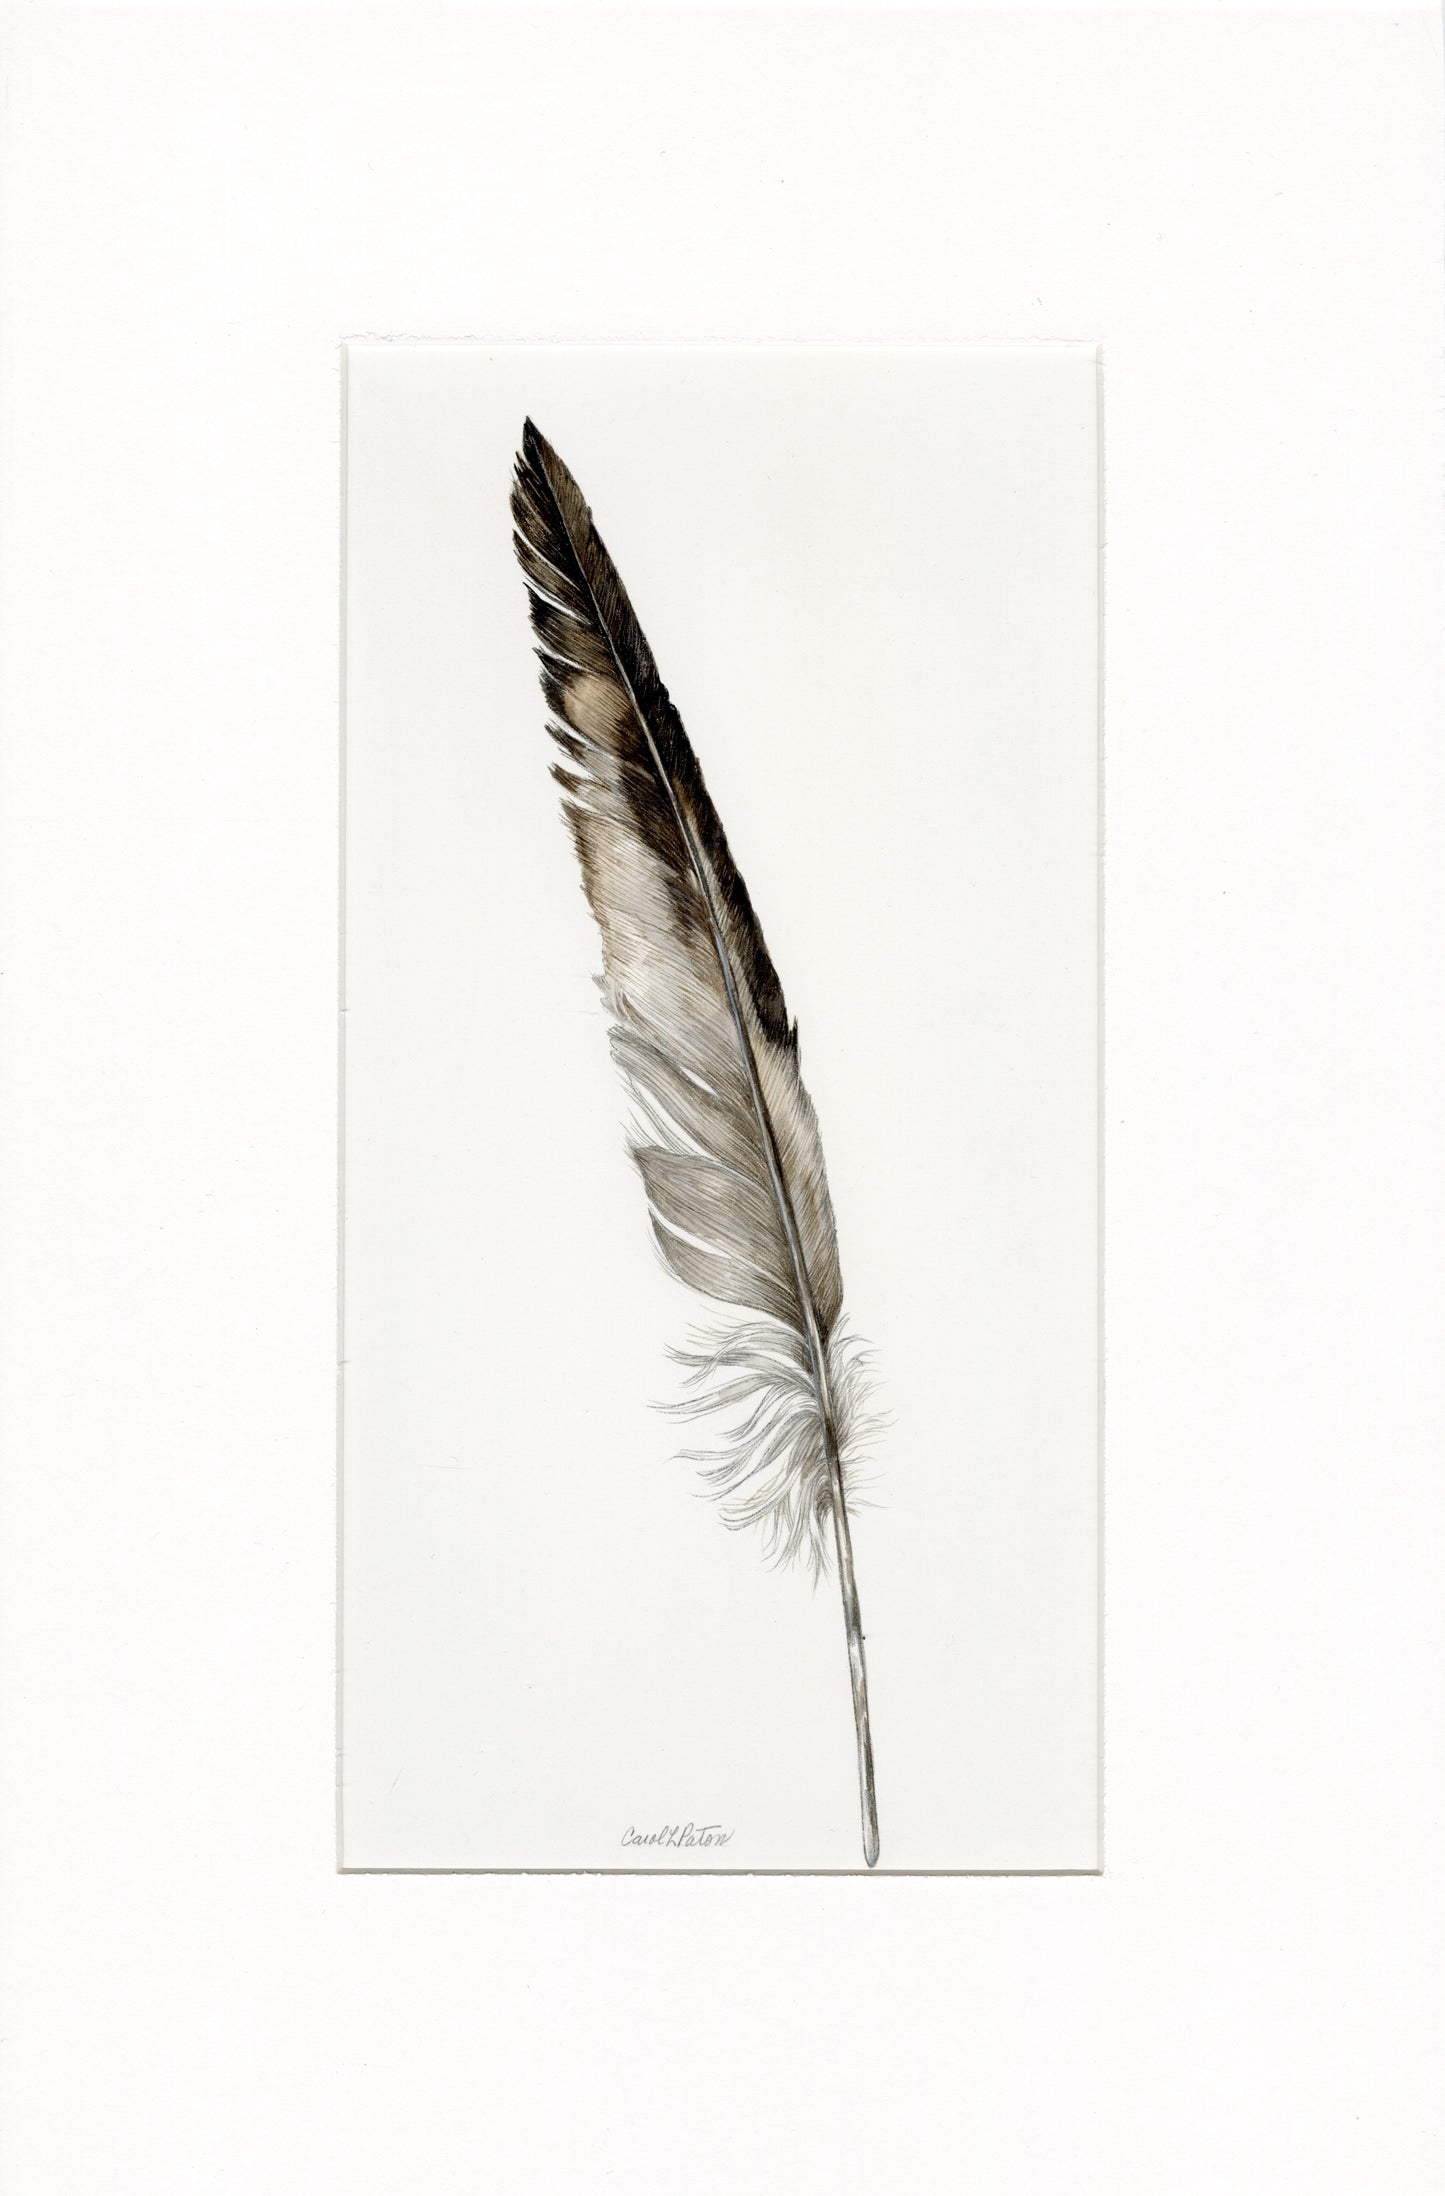 Gull Feather by Carol Paton - SOLD